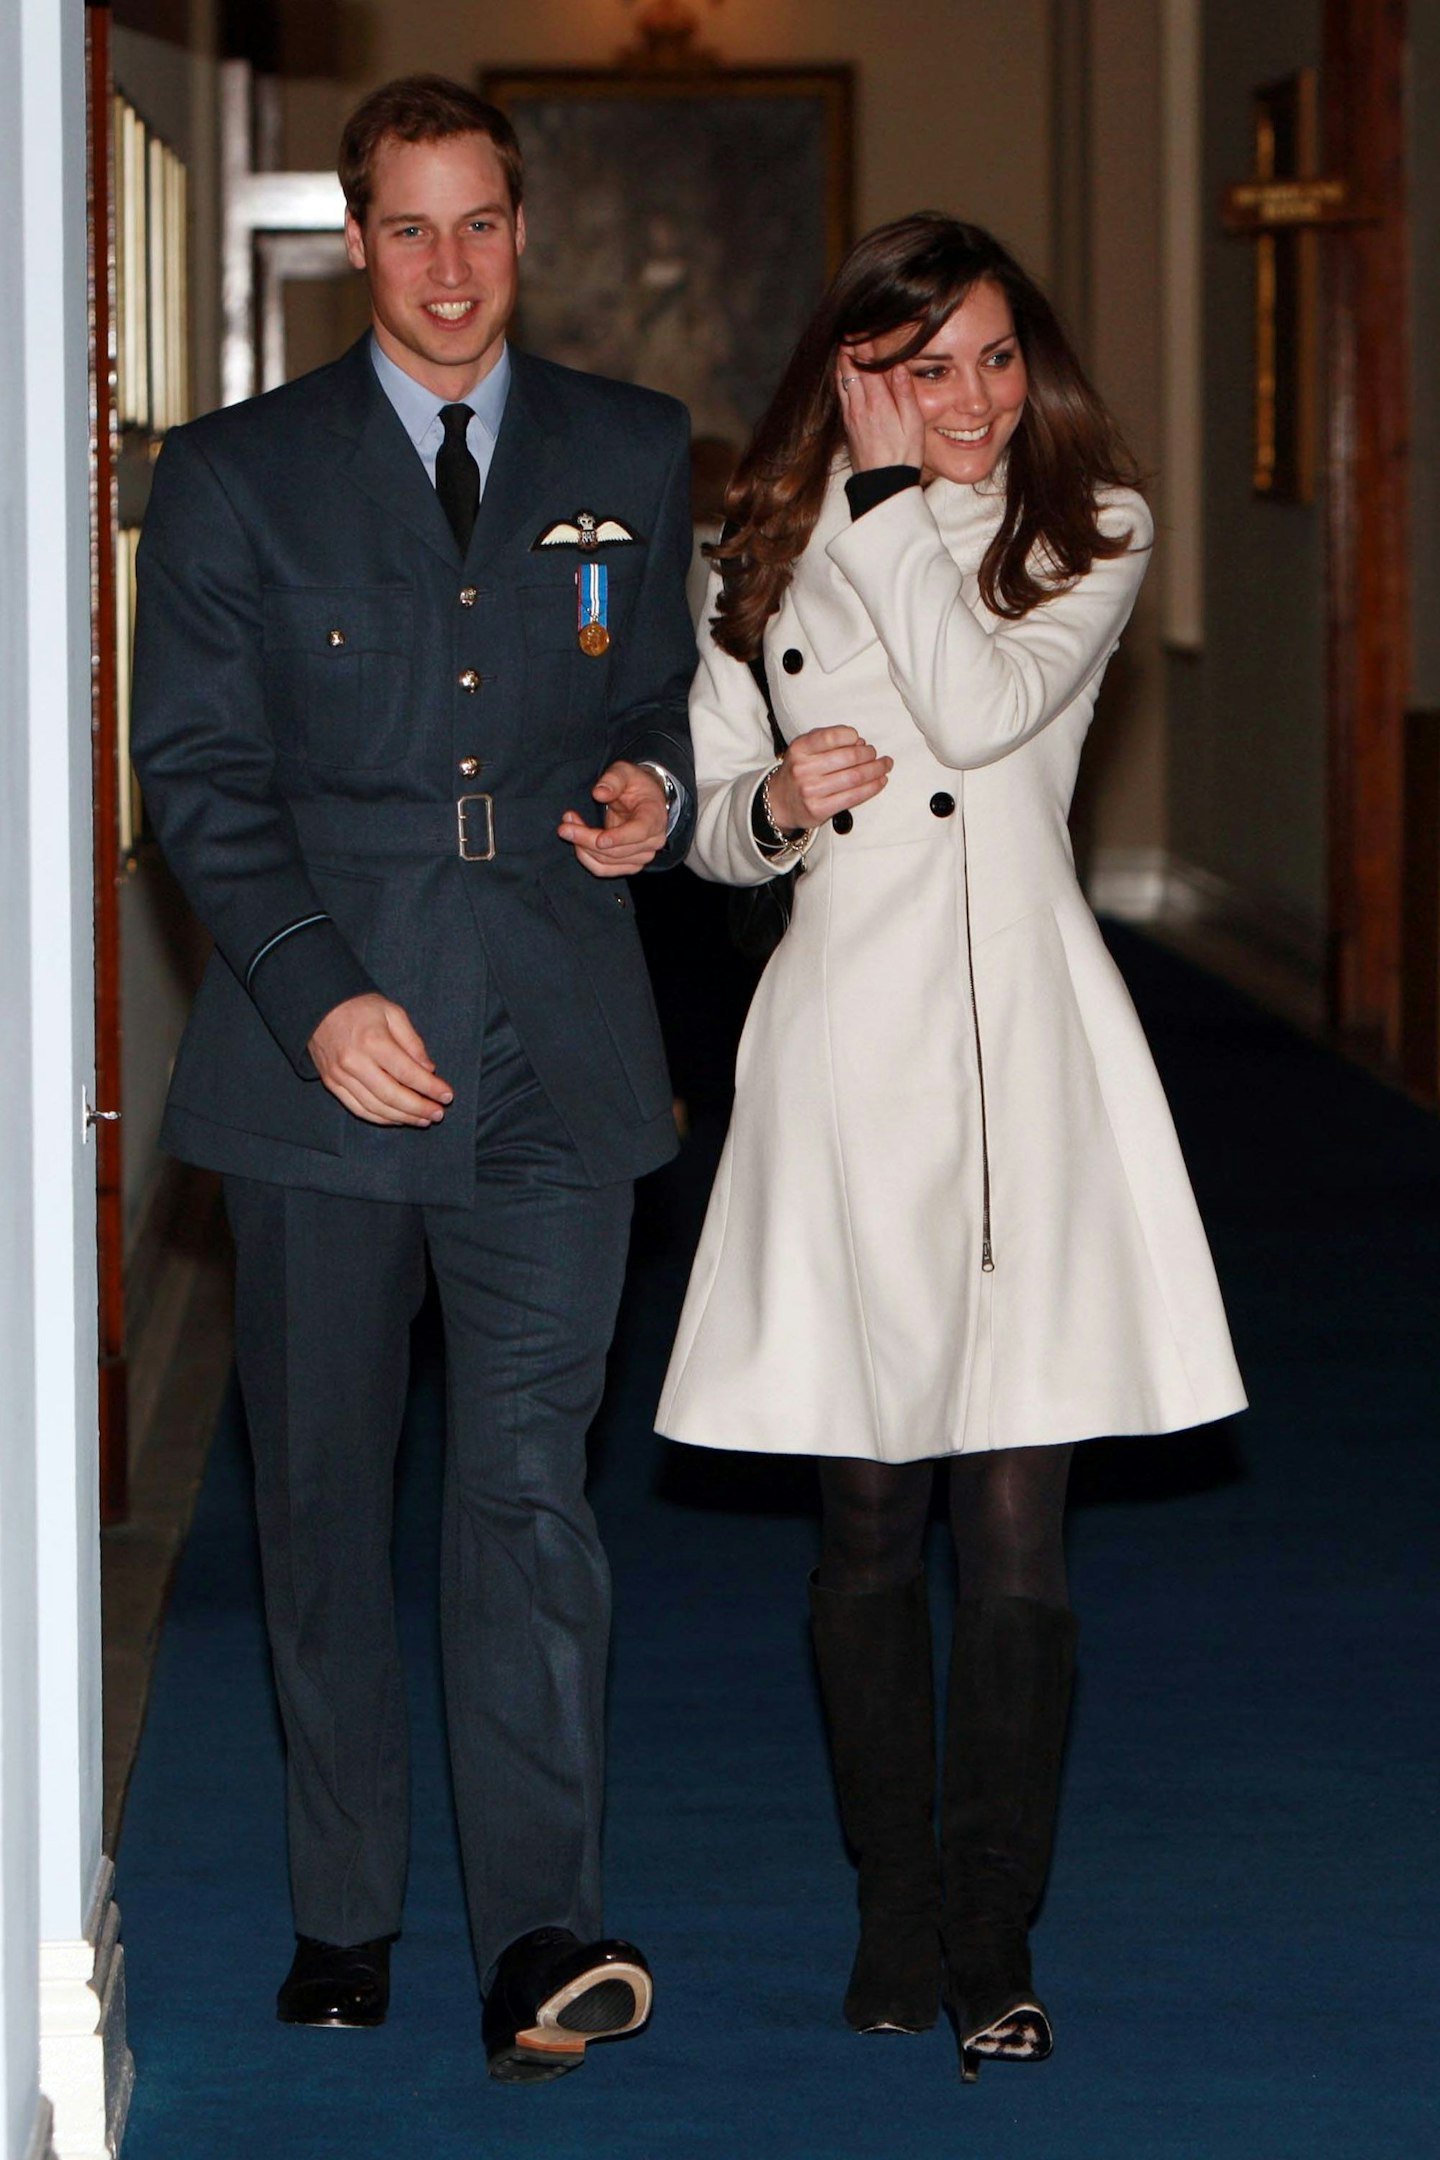 Kate Middleton accompanies Prince William to his RAF 'Wings' ceremony in 2008